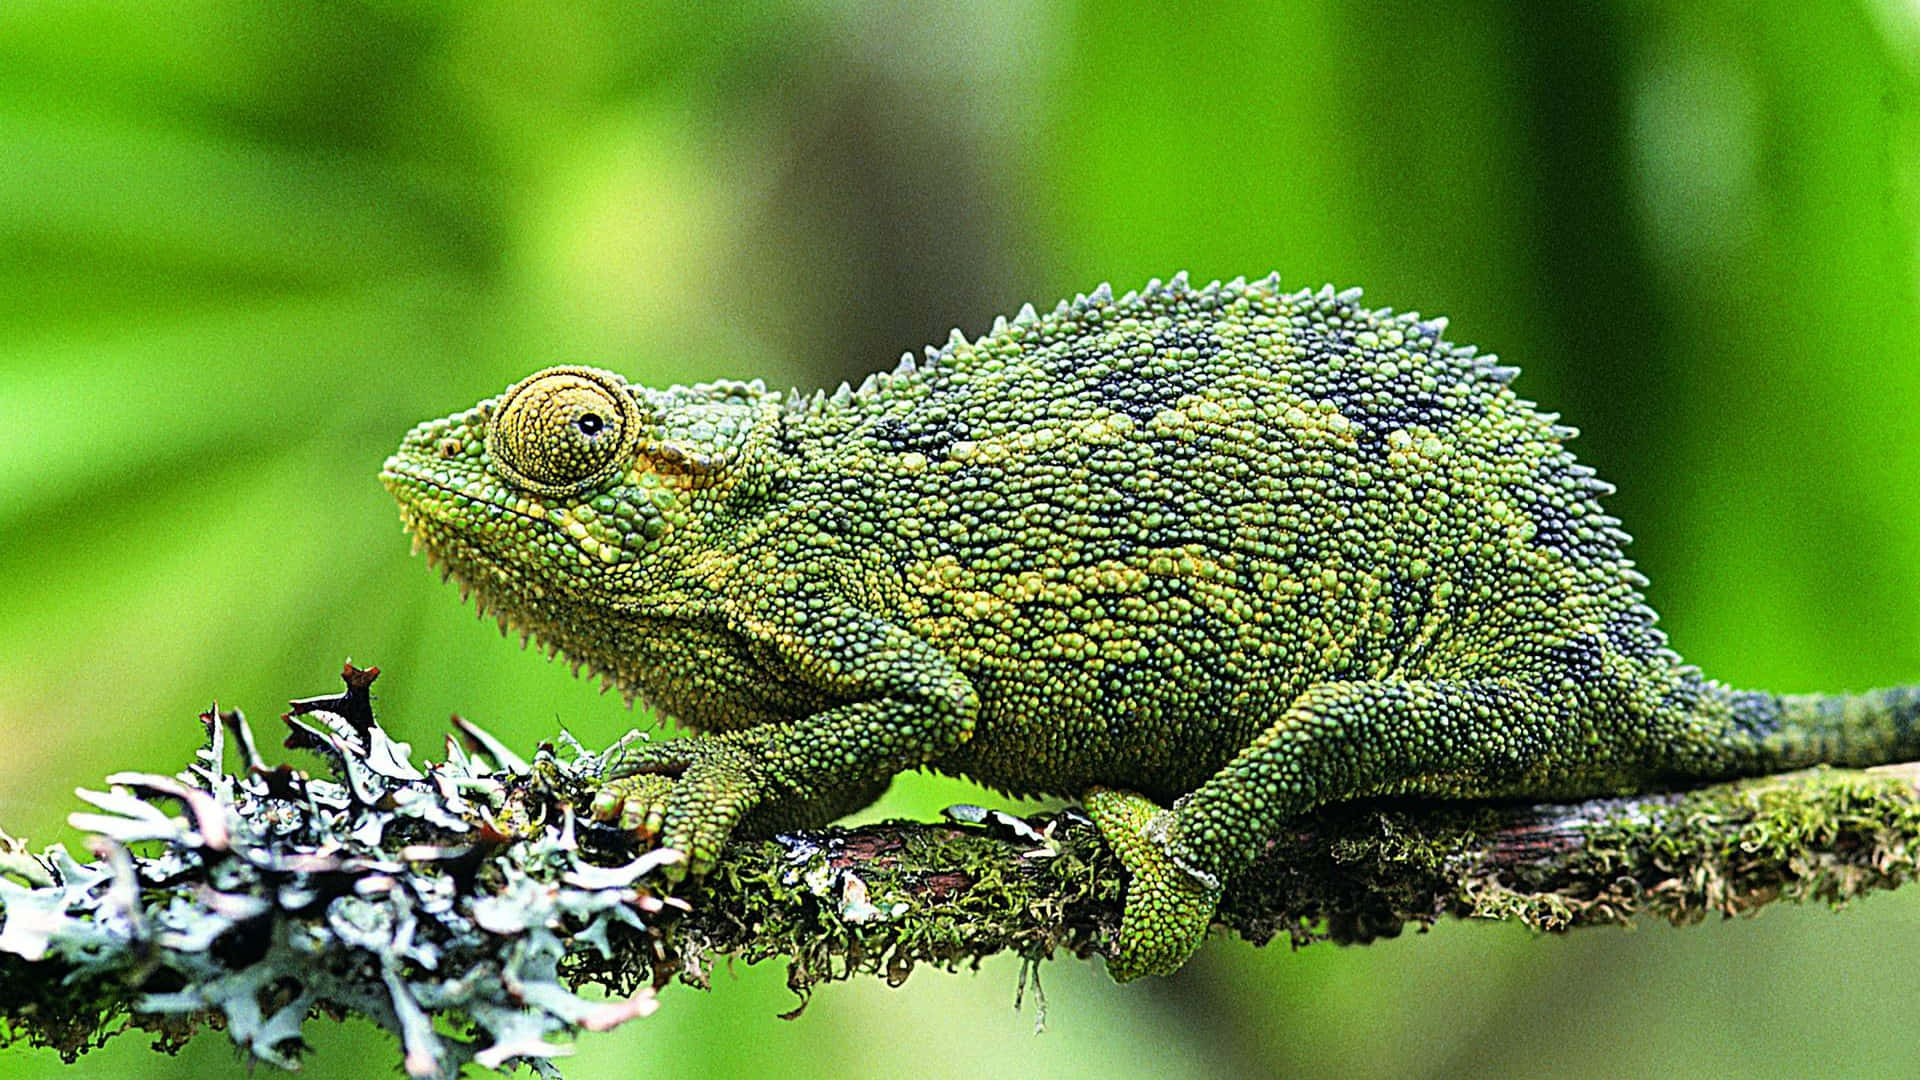 Chameleon Lizard Crawling On Branch Picture